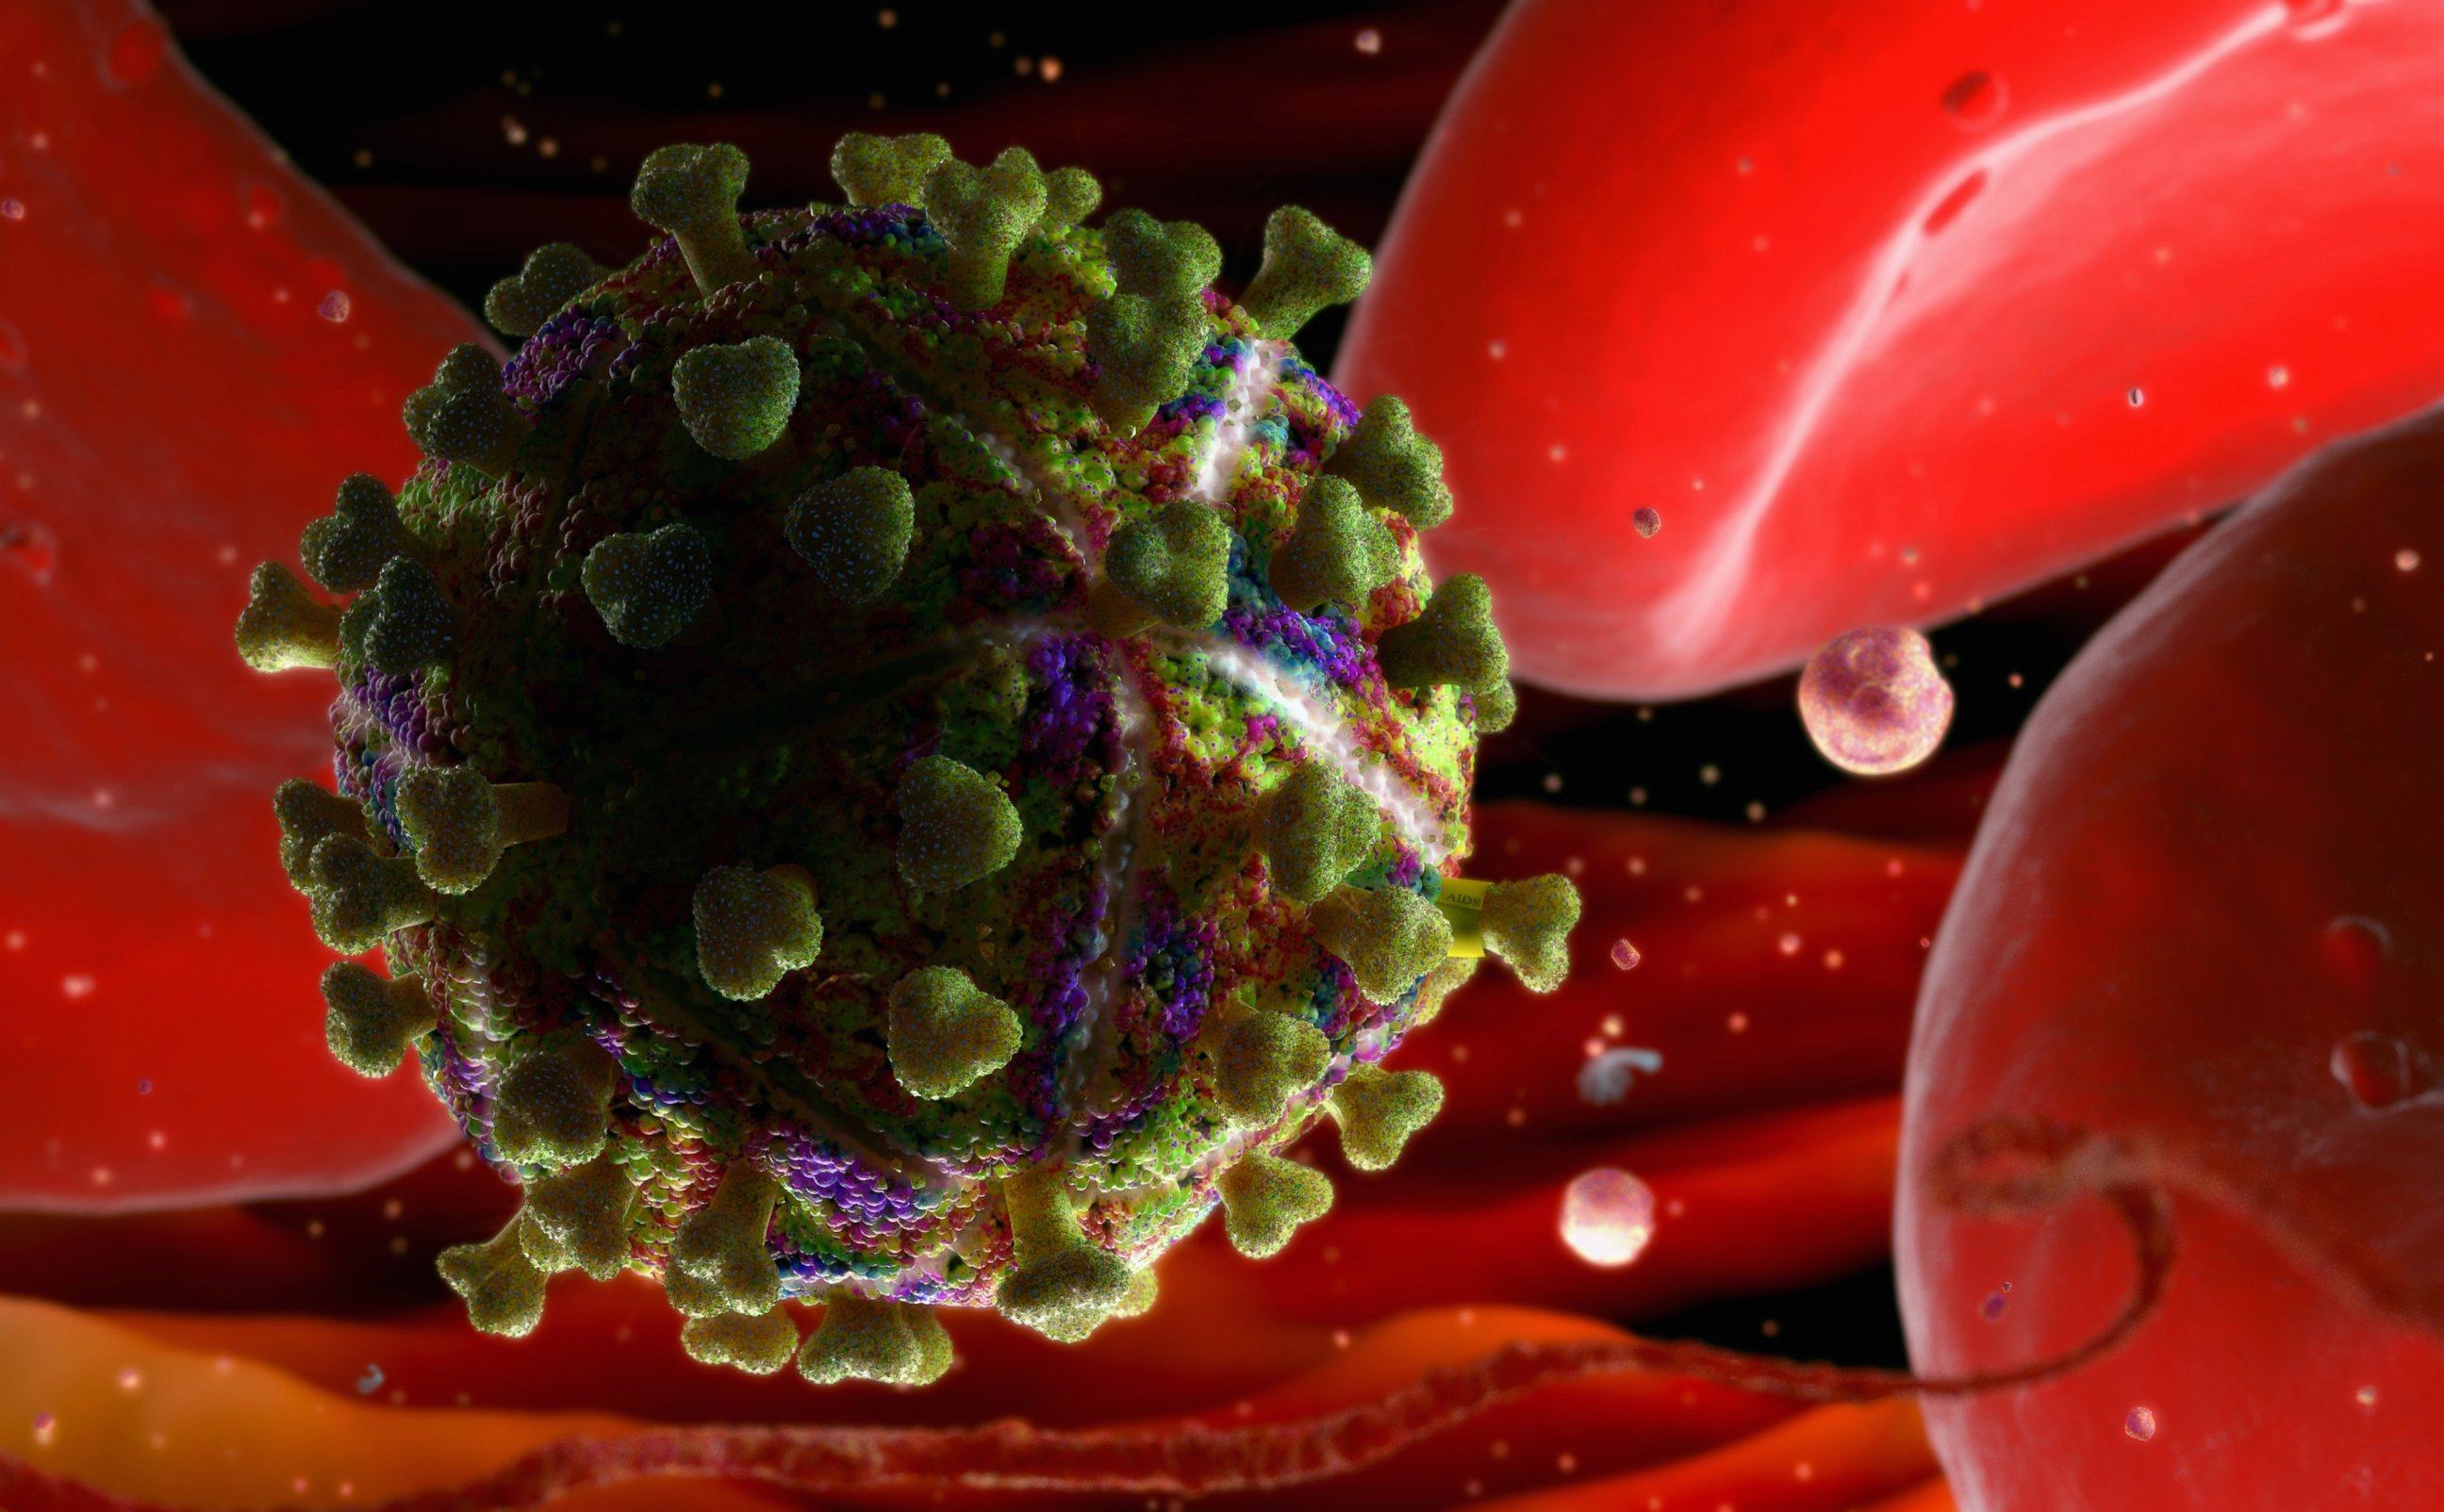 PHOTO: A depiction of the HIV virus in the bloodstream.